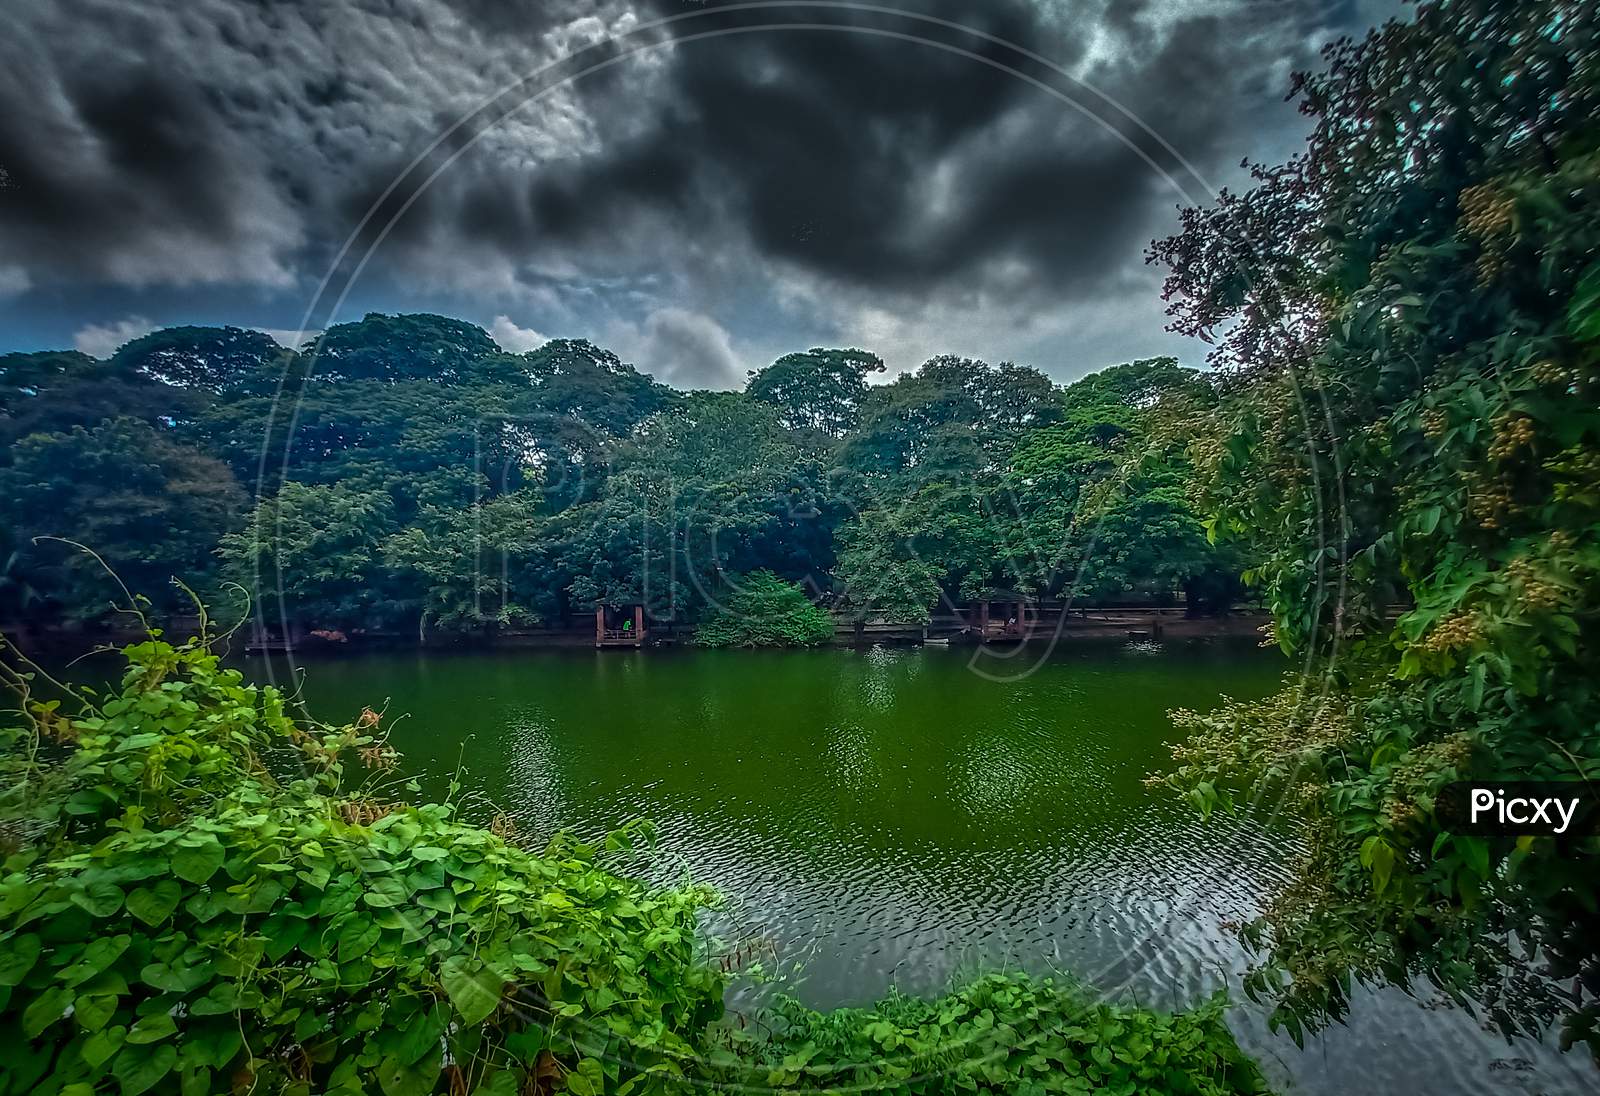 A Beautiful Lake In A Park Under The Cloudy Sky Surround By Beautiful Tree